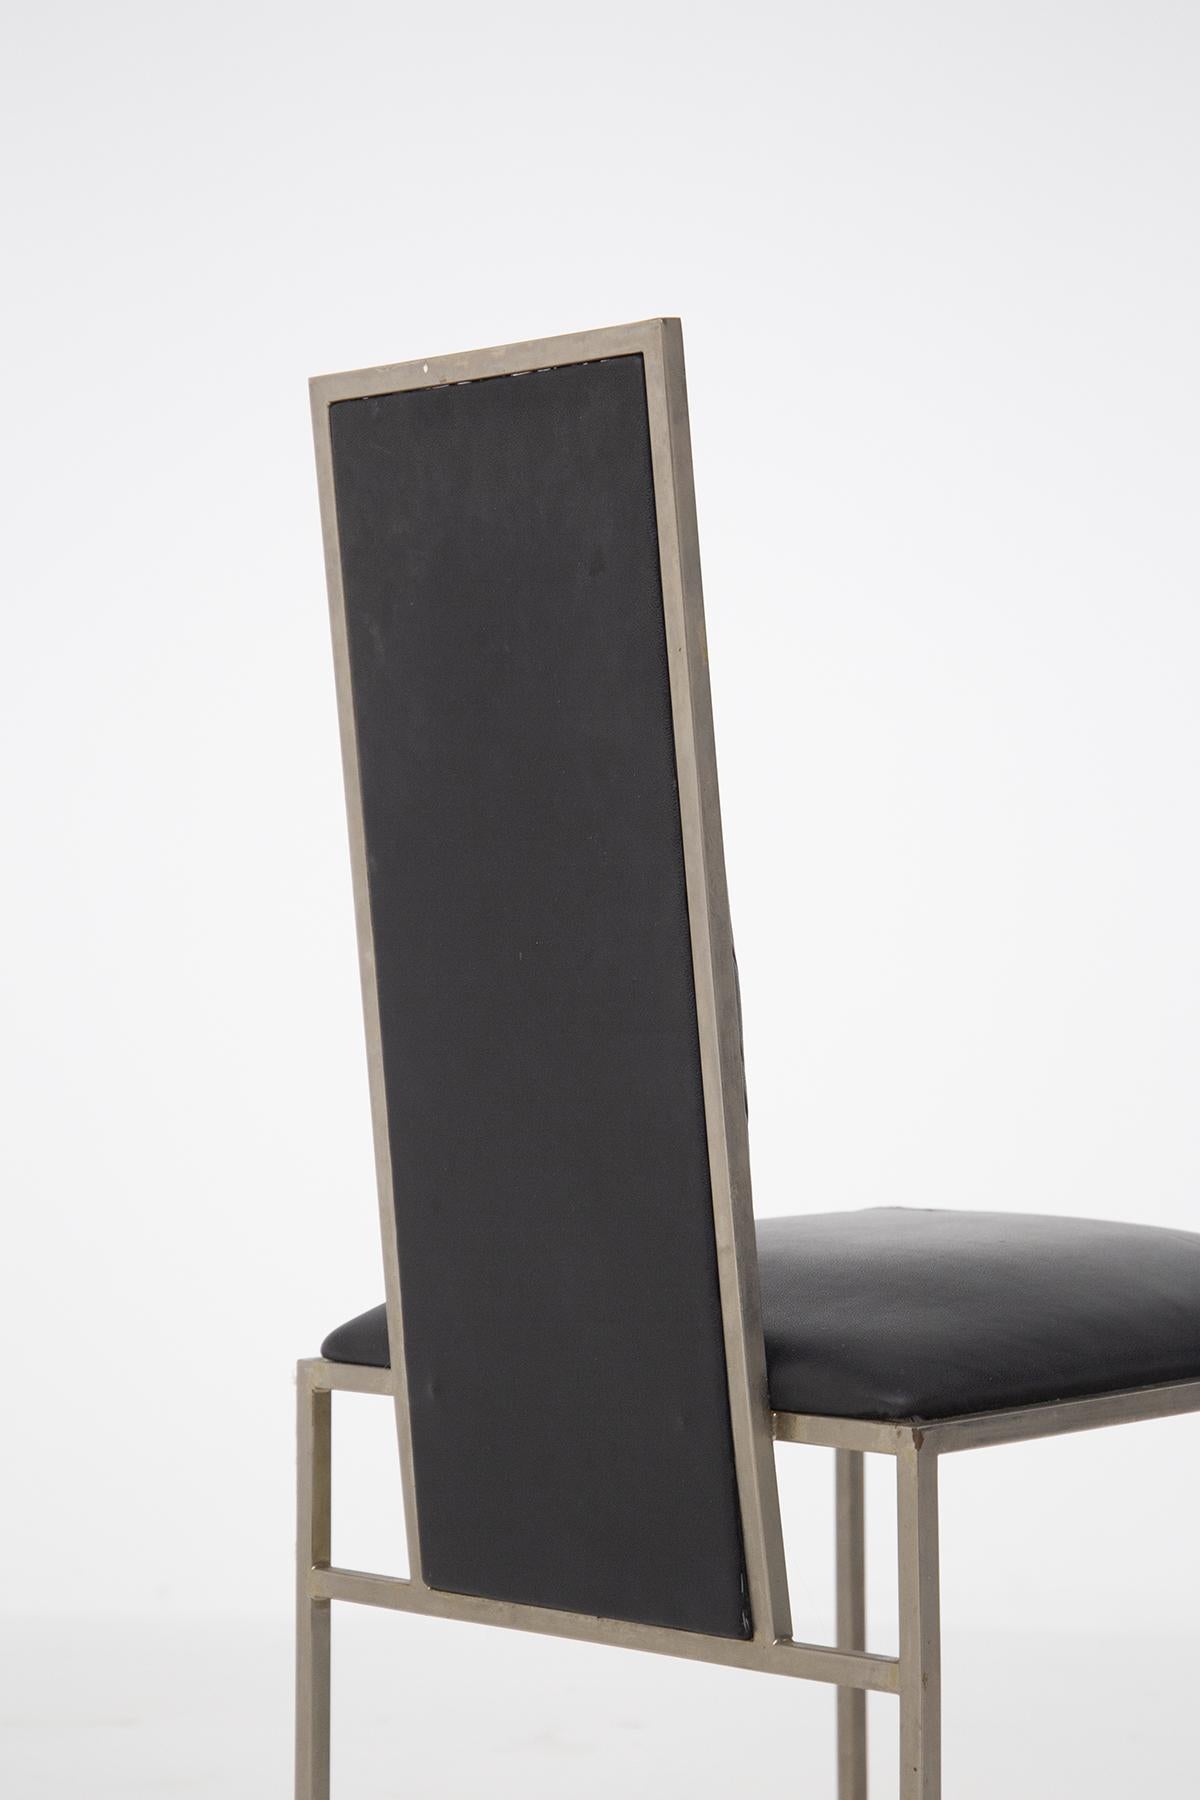 Romeo Rega Set of Six Dining Chair in Black Leather and Steel 5